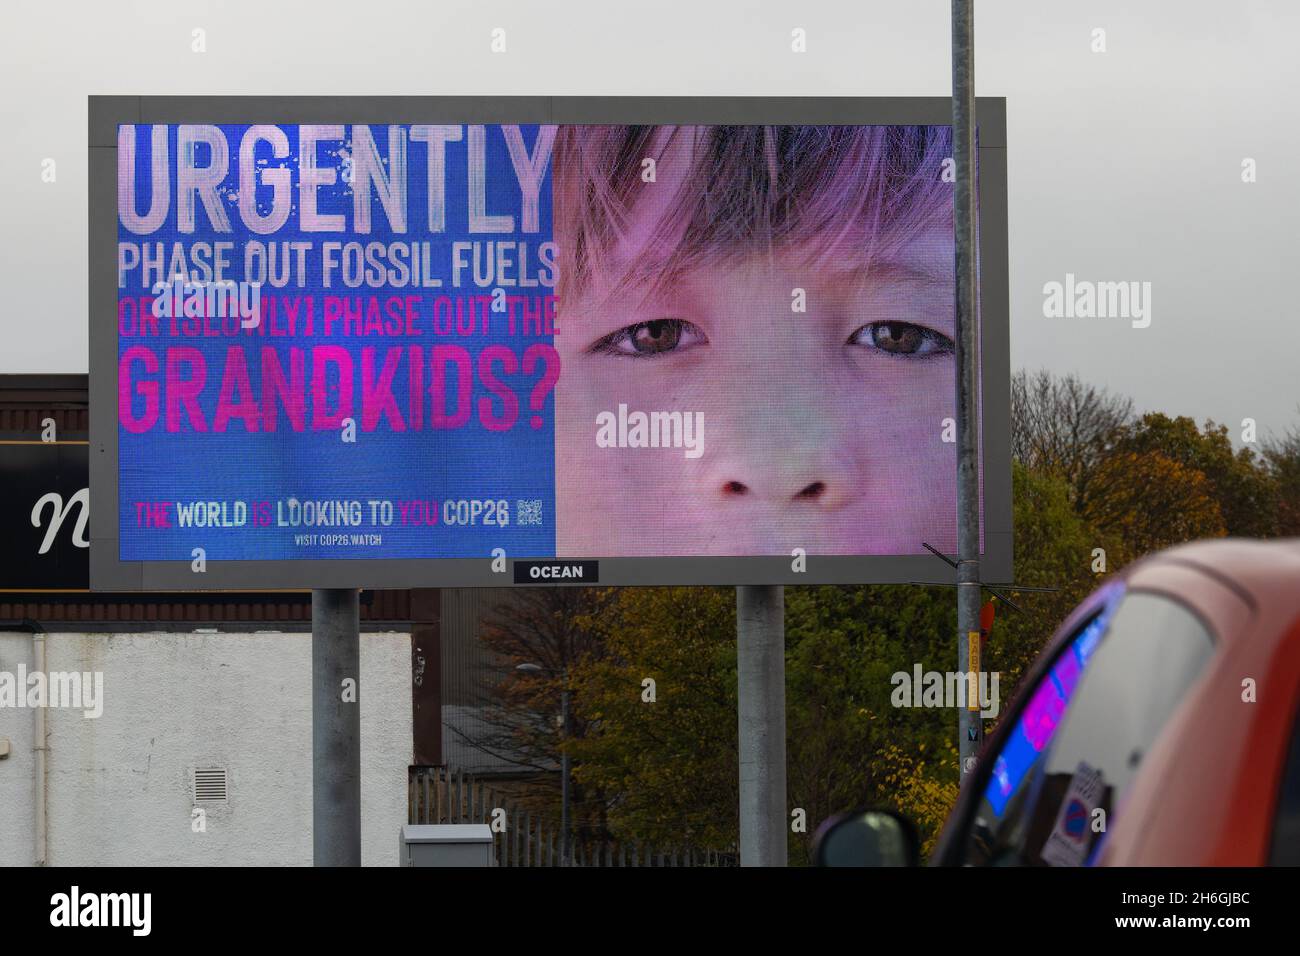 COP26 urgently phase out fossil fuels or slowly phase out the grandkids - The World is Looking to You COP26 electronic billboard, Glasgow, Scotland UK Stock Photo